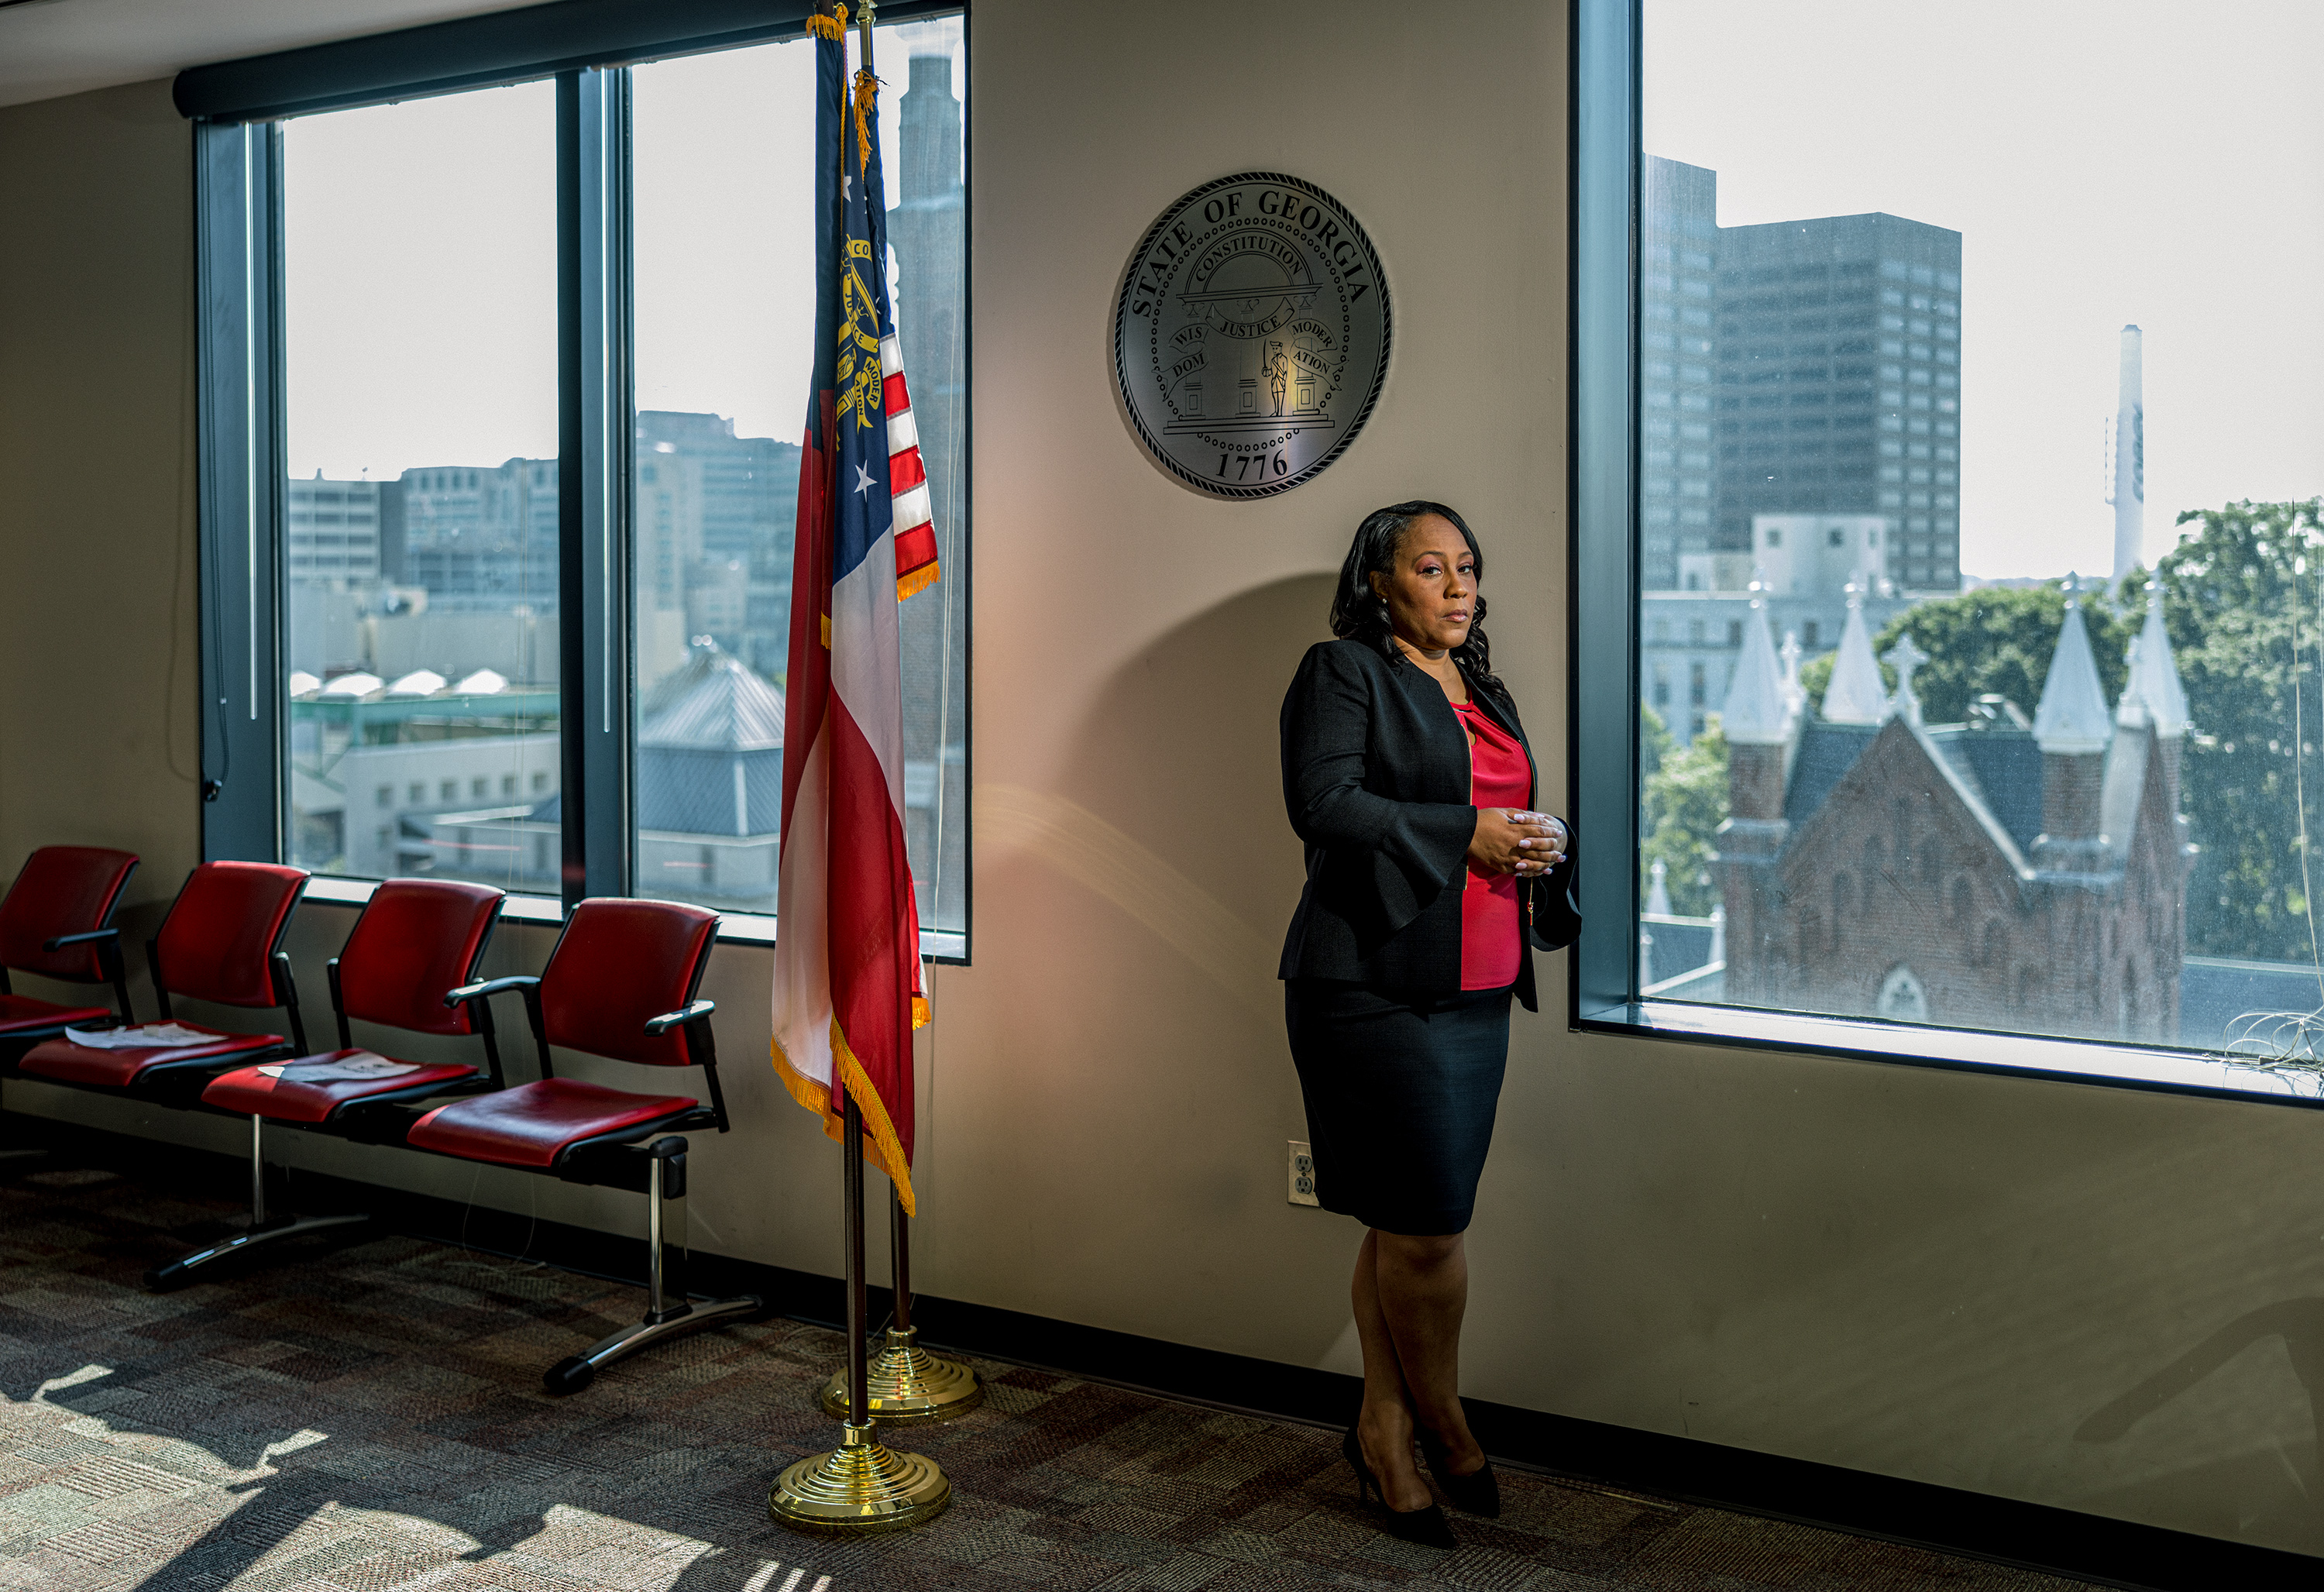 District Attorney Fani Willis at the Fulton County Courthouse on Aug. 14, 2021 (Lynsey Weatherspoon for TIME)